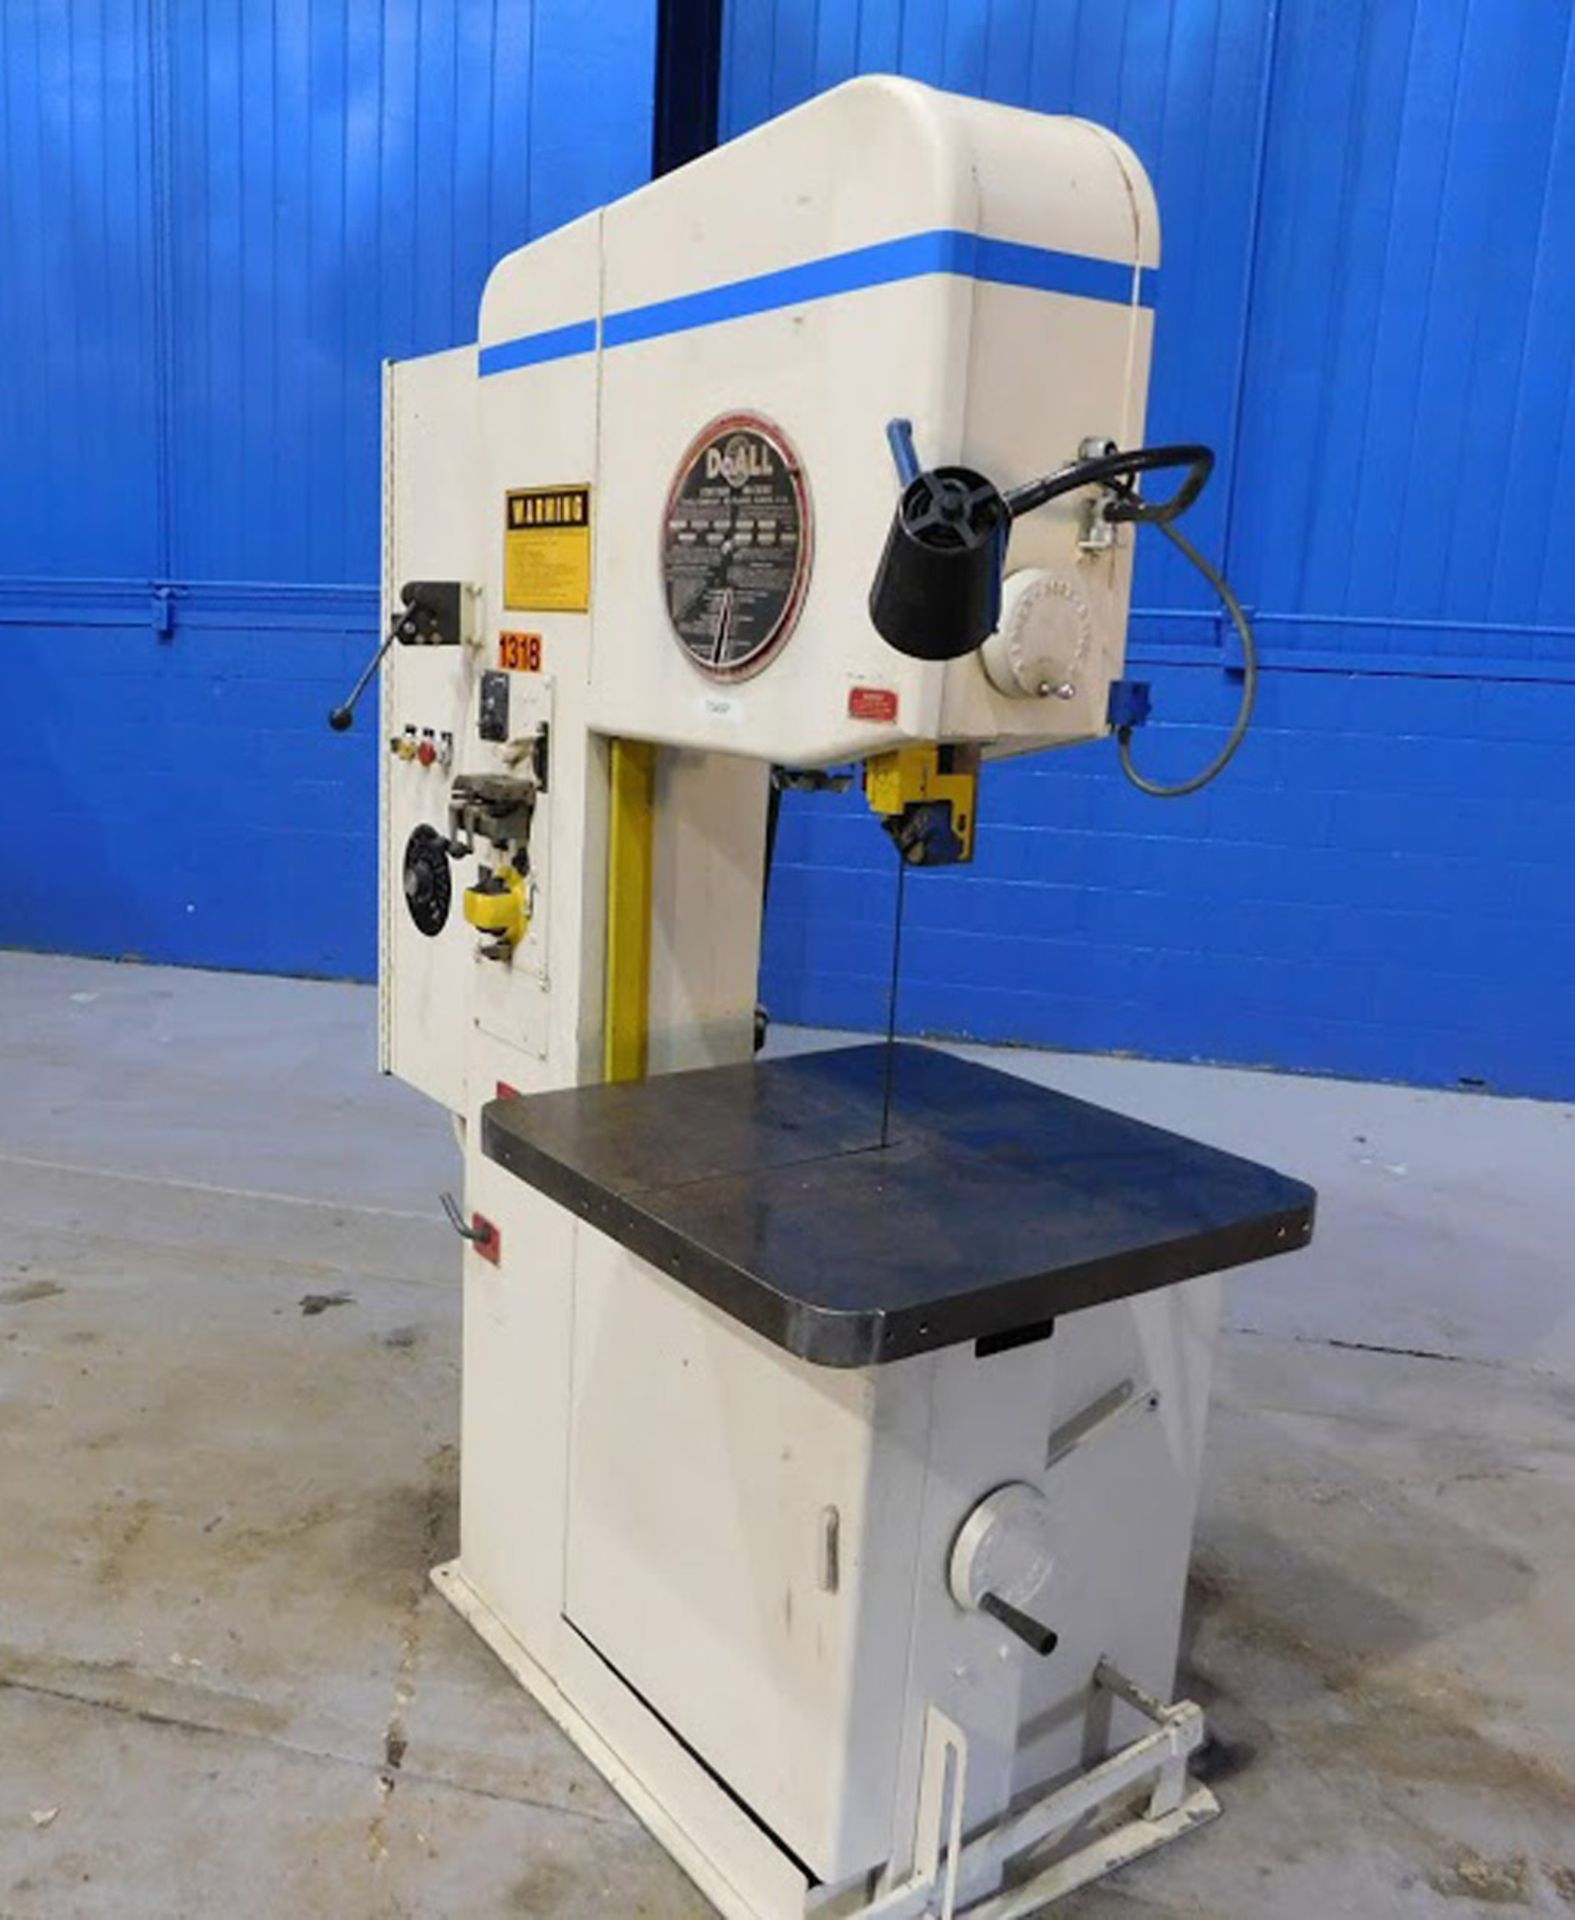 FREE LOADING - Located In: Painesville, OH - 1980 Doall Vertical Bandsaw, 20", Mdl: 2013- 20, S/N: - Image 2 of 8